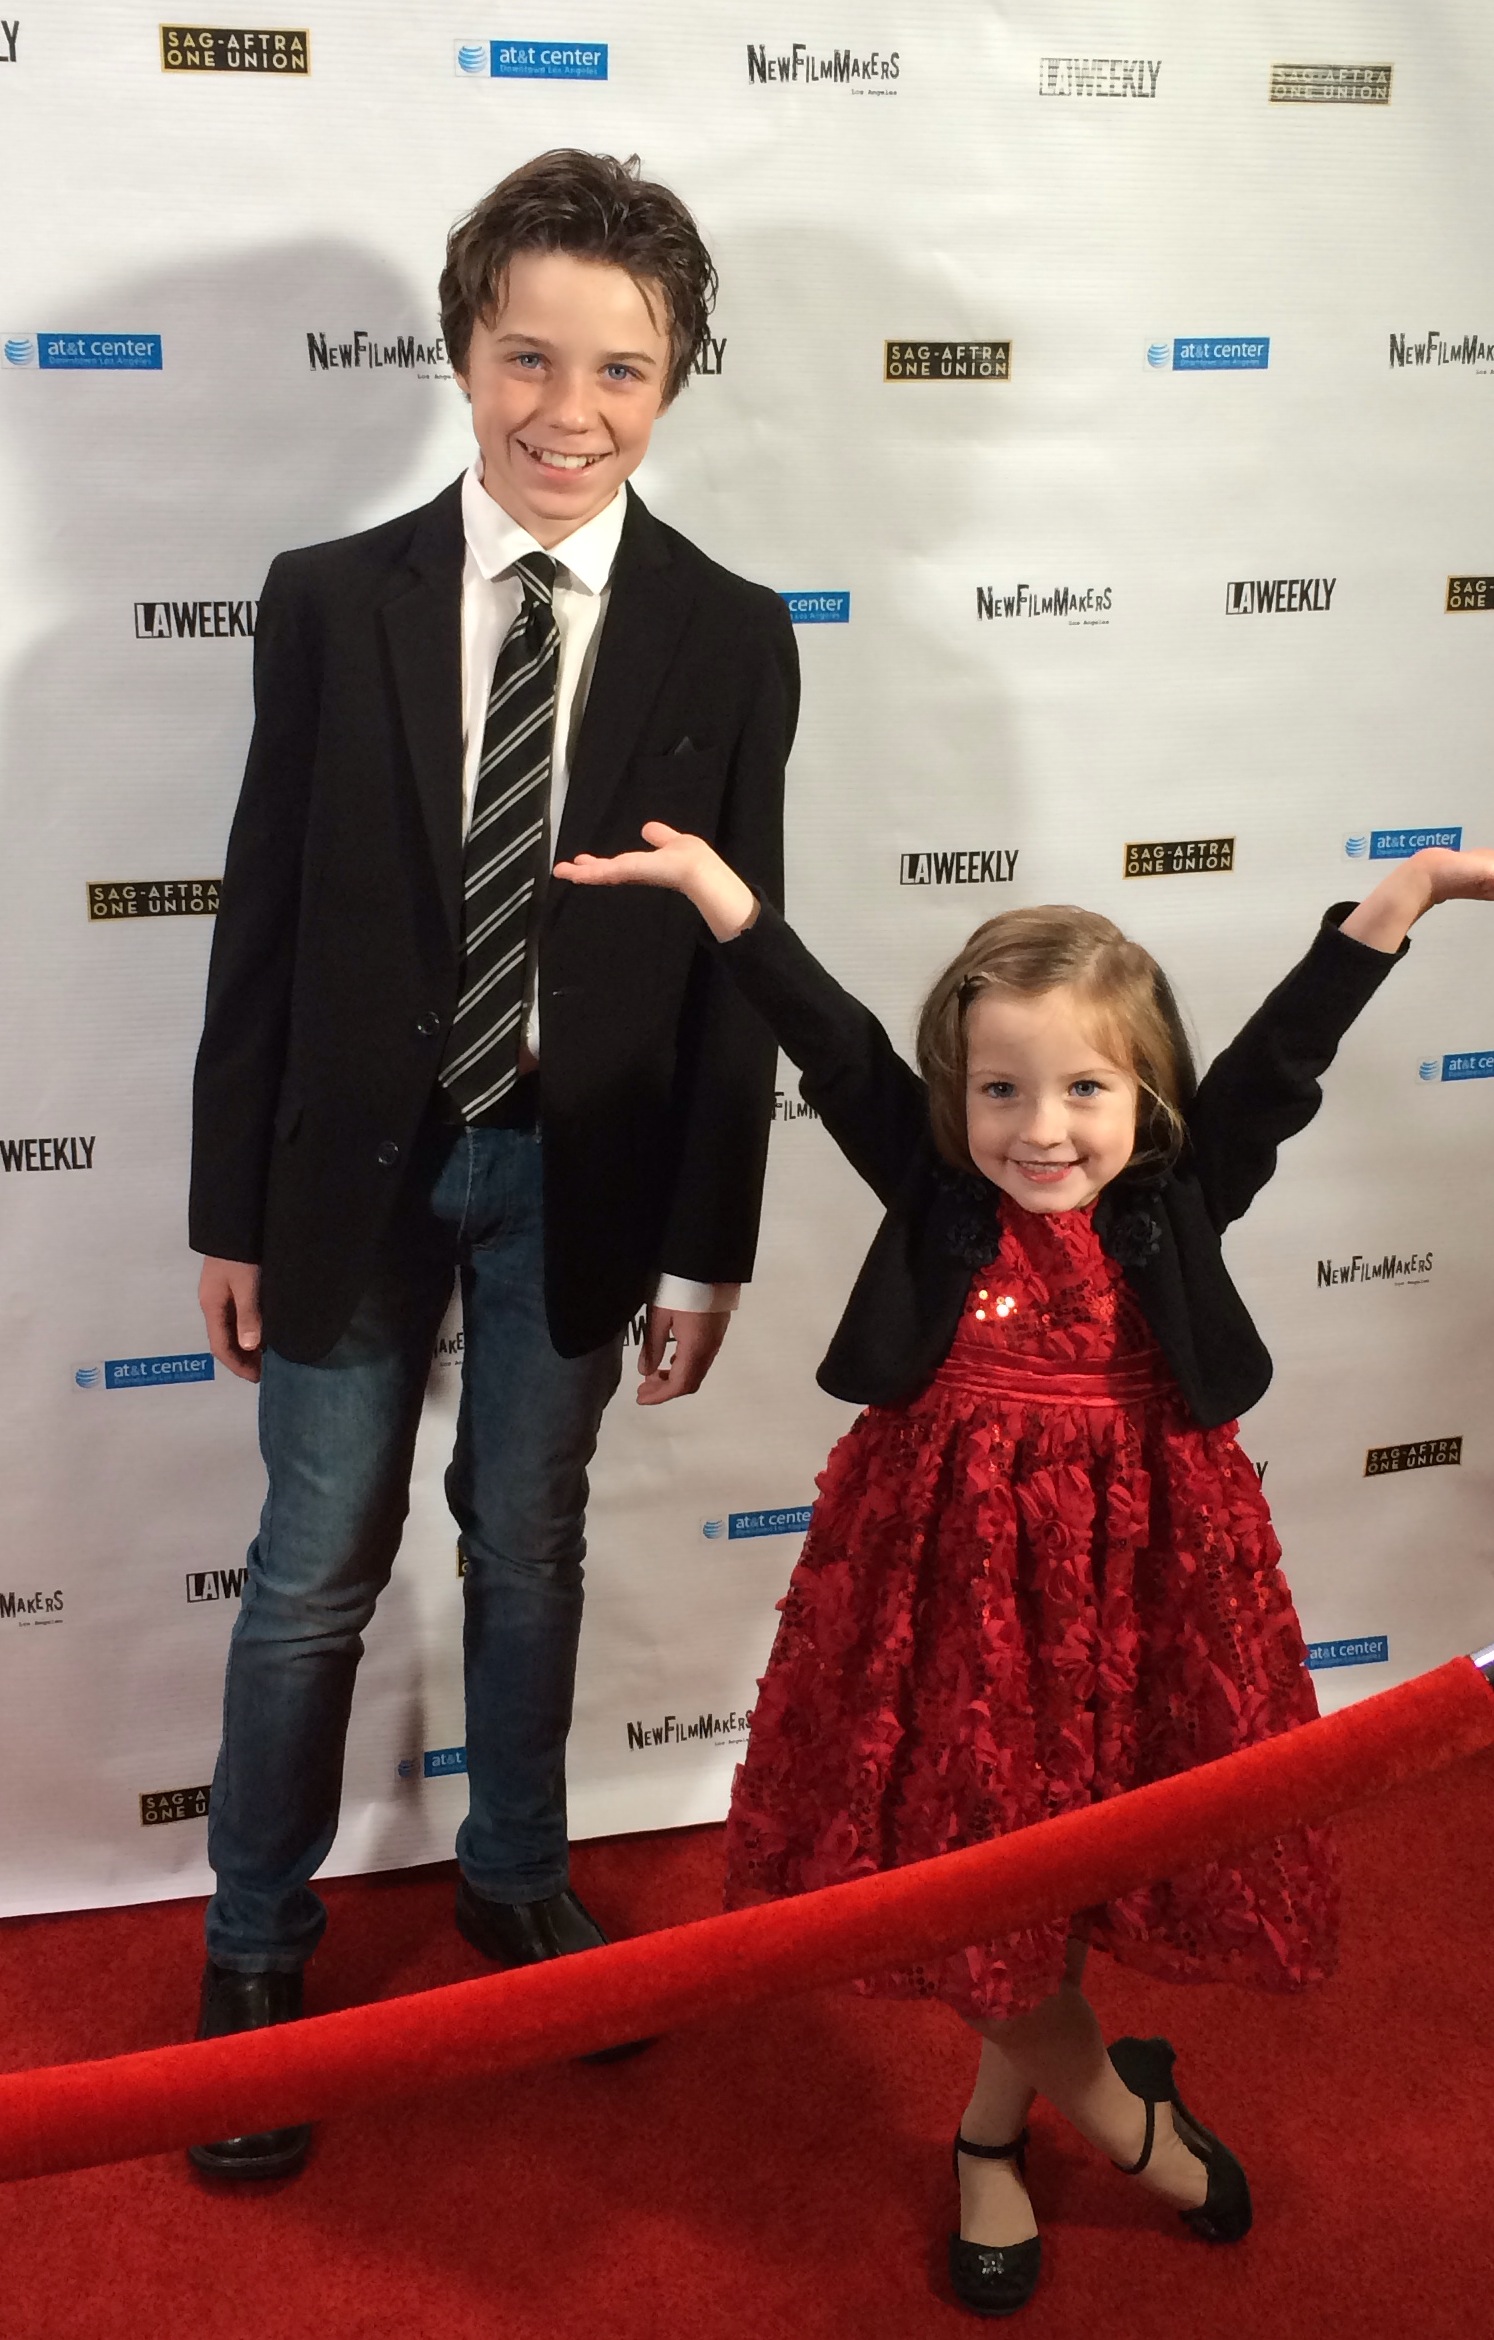 Sunnie learning about the red carpet from her brother Landon for his short film King Eternal